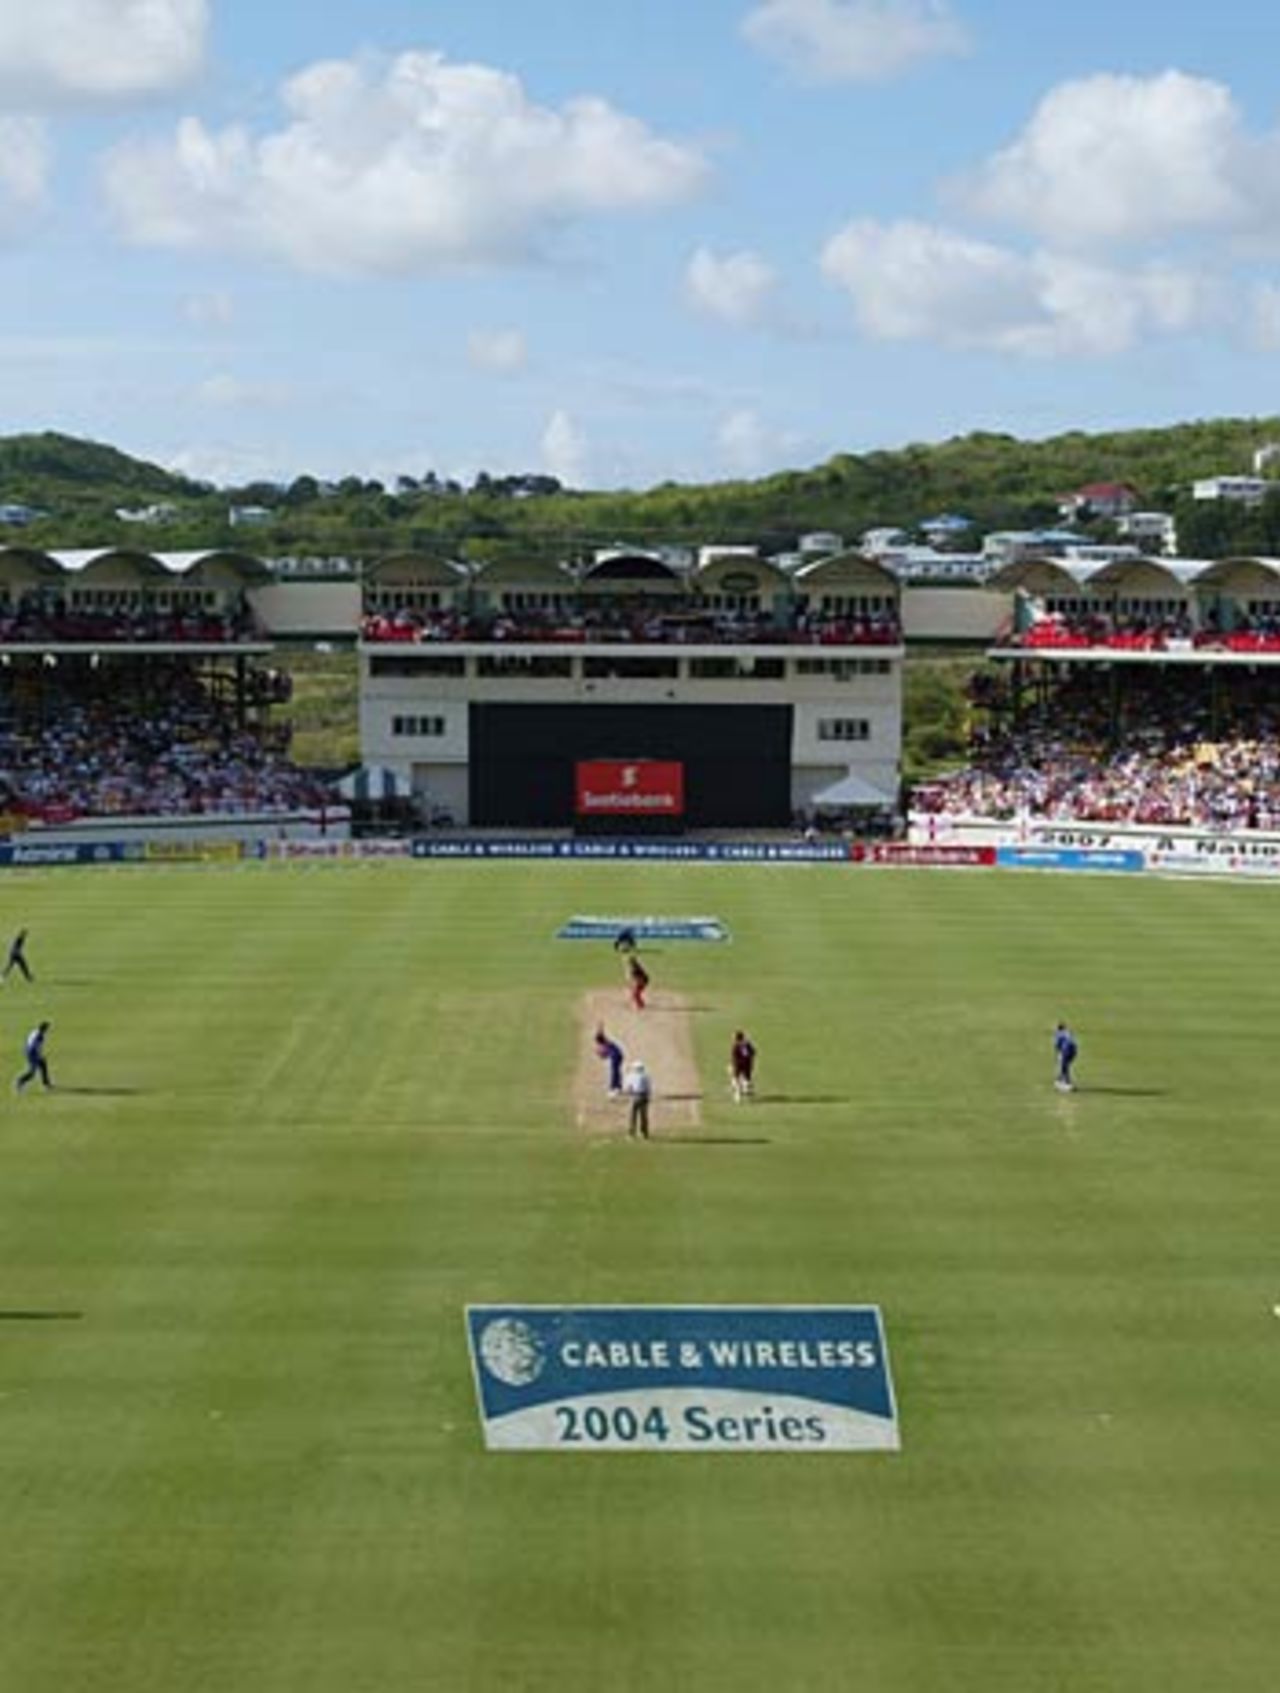 A general veiw of the Beausejour cricket ground, St. Lucia, West Indies v England, May 2, 2004